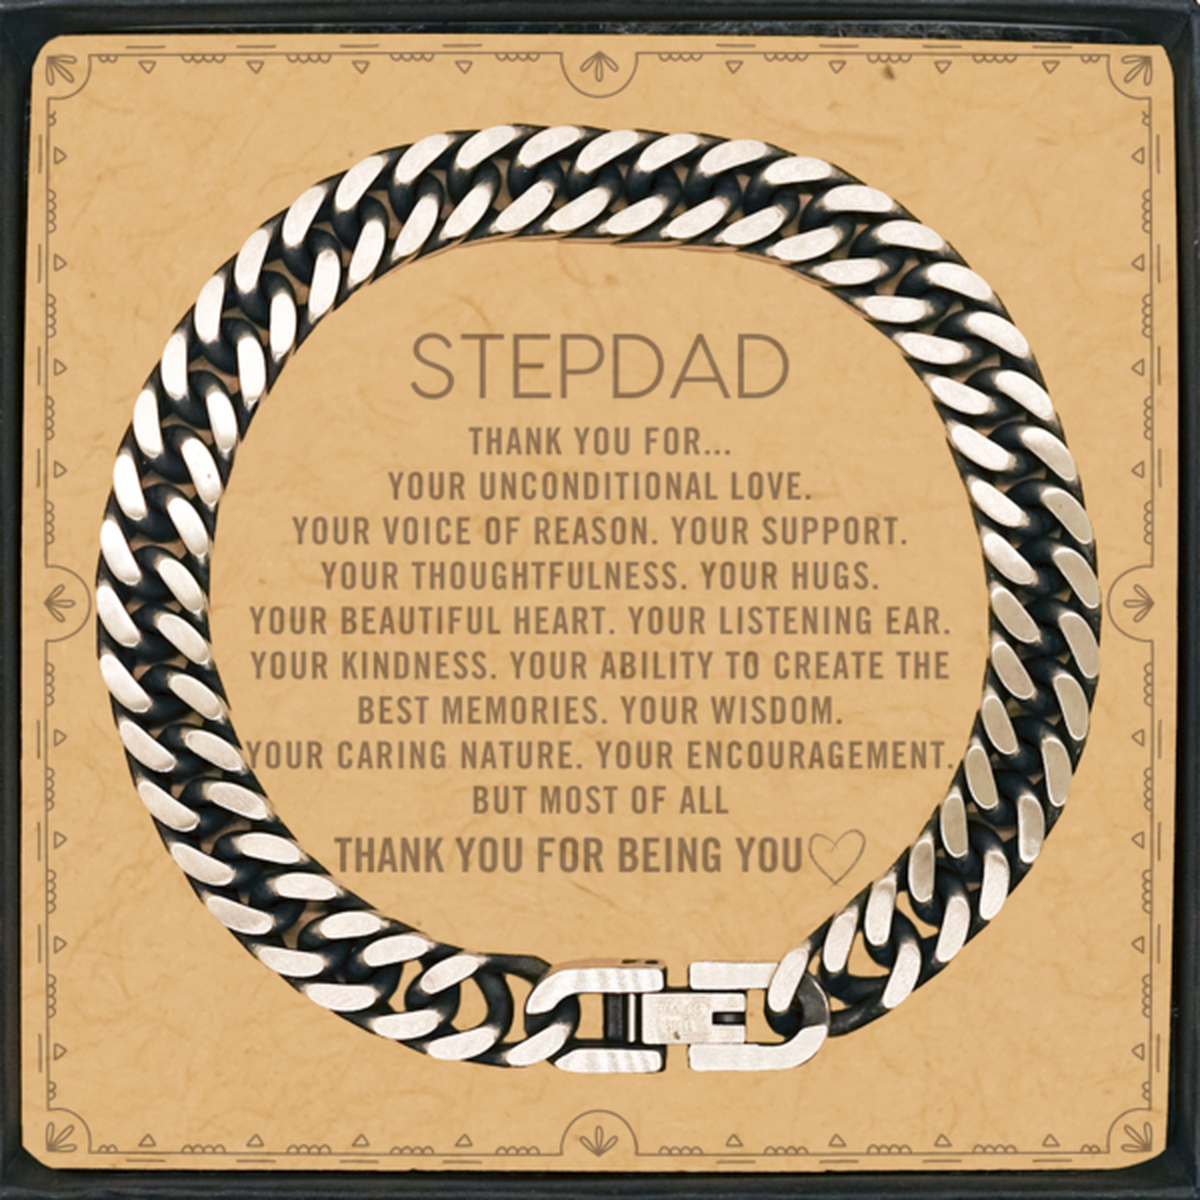 Stepdad Cuban Link Chain Bracelet Custom, Message Card Gifts For Stepdad Christmas Graduation Birthday Gifts for Men Women Stepdad Thank you for Your unconditional love